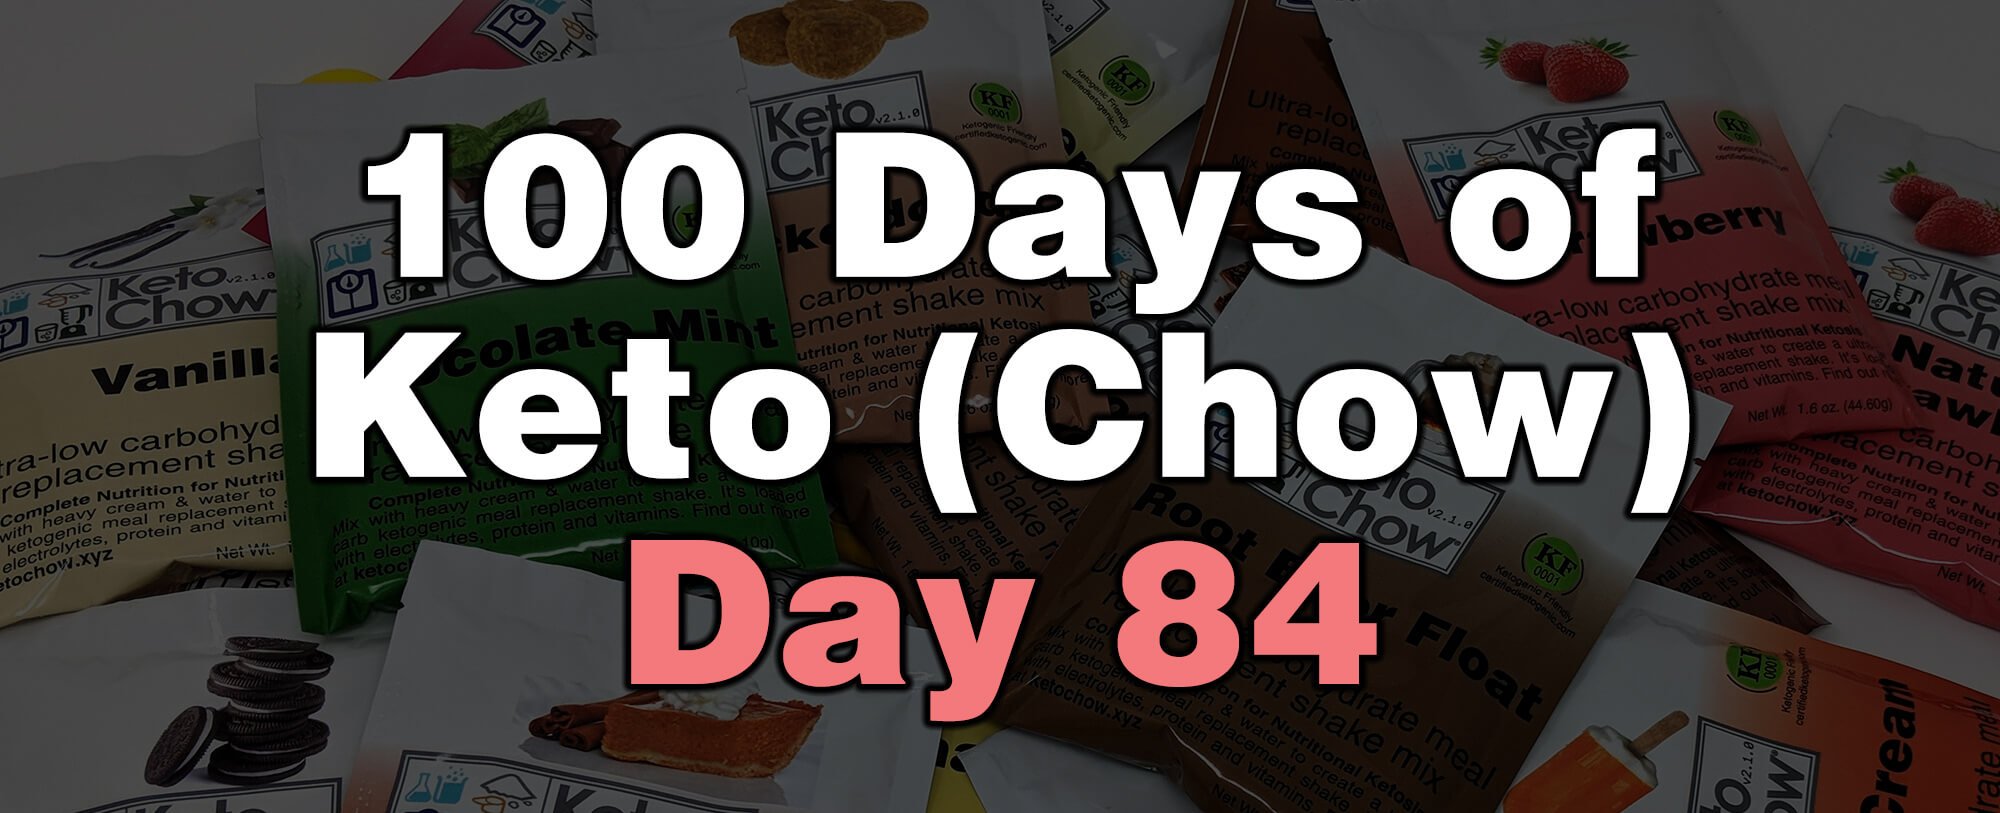 100 days of keto chow day 84